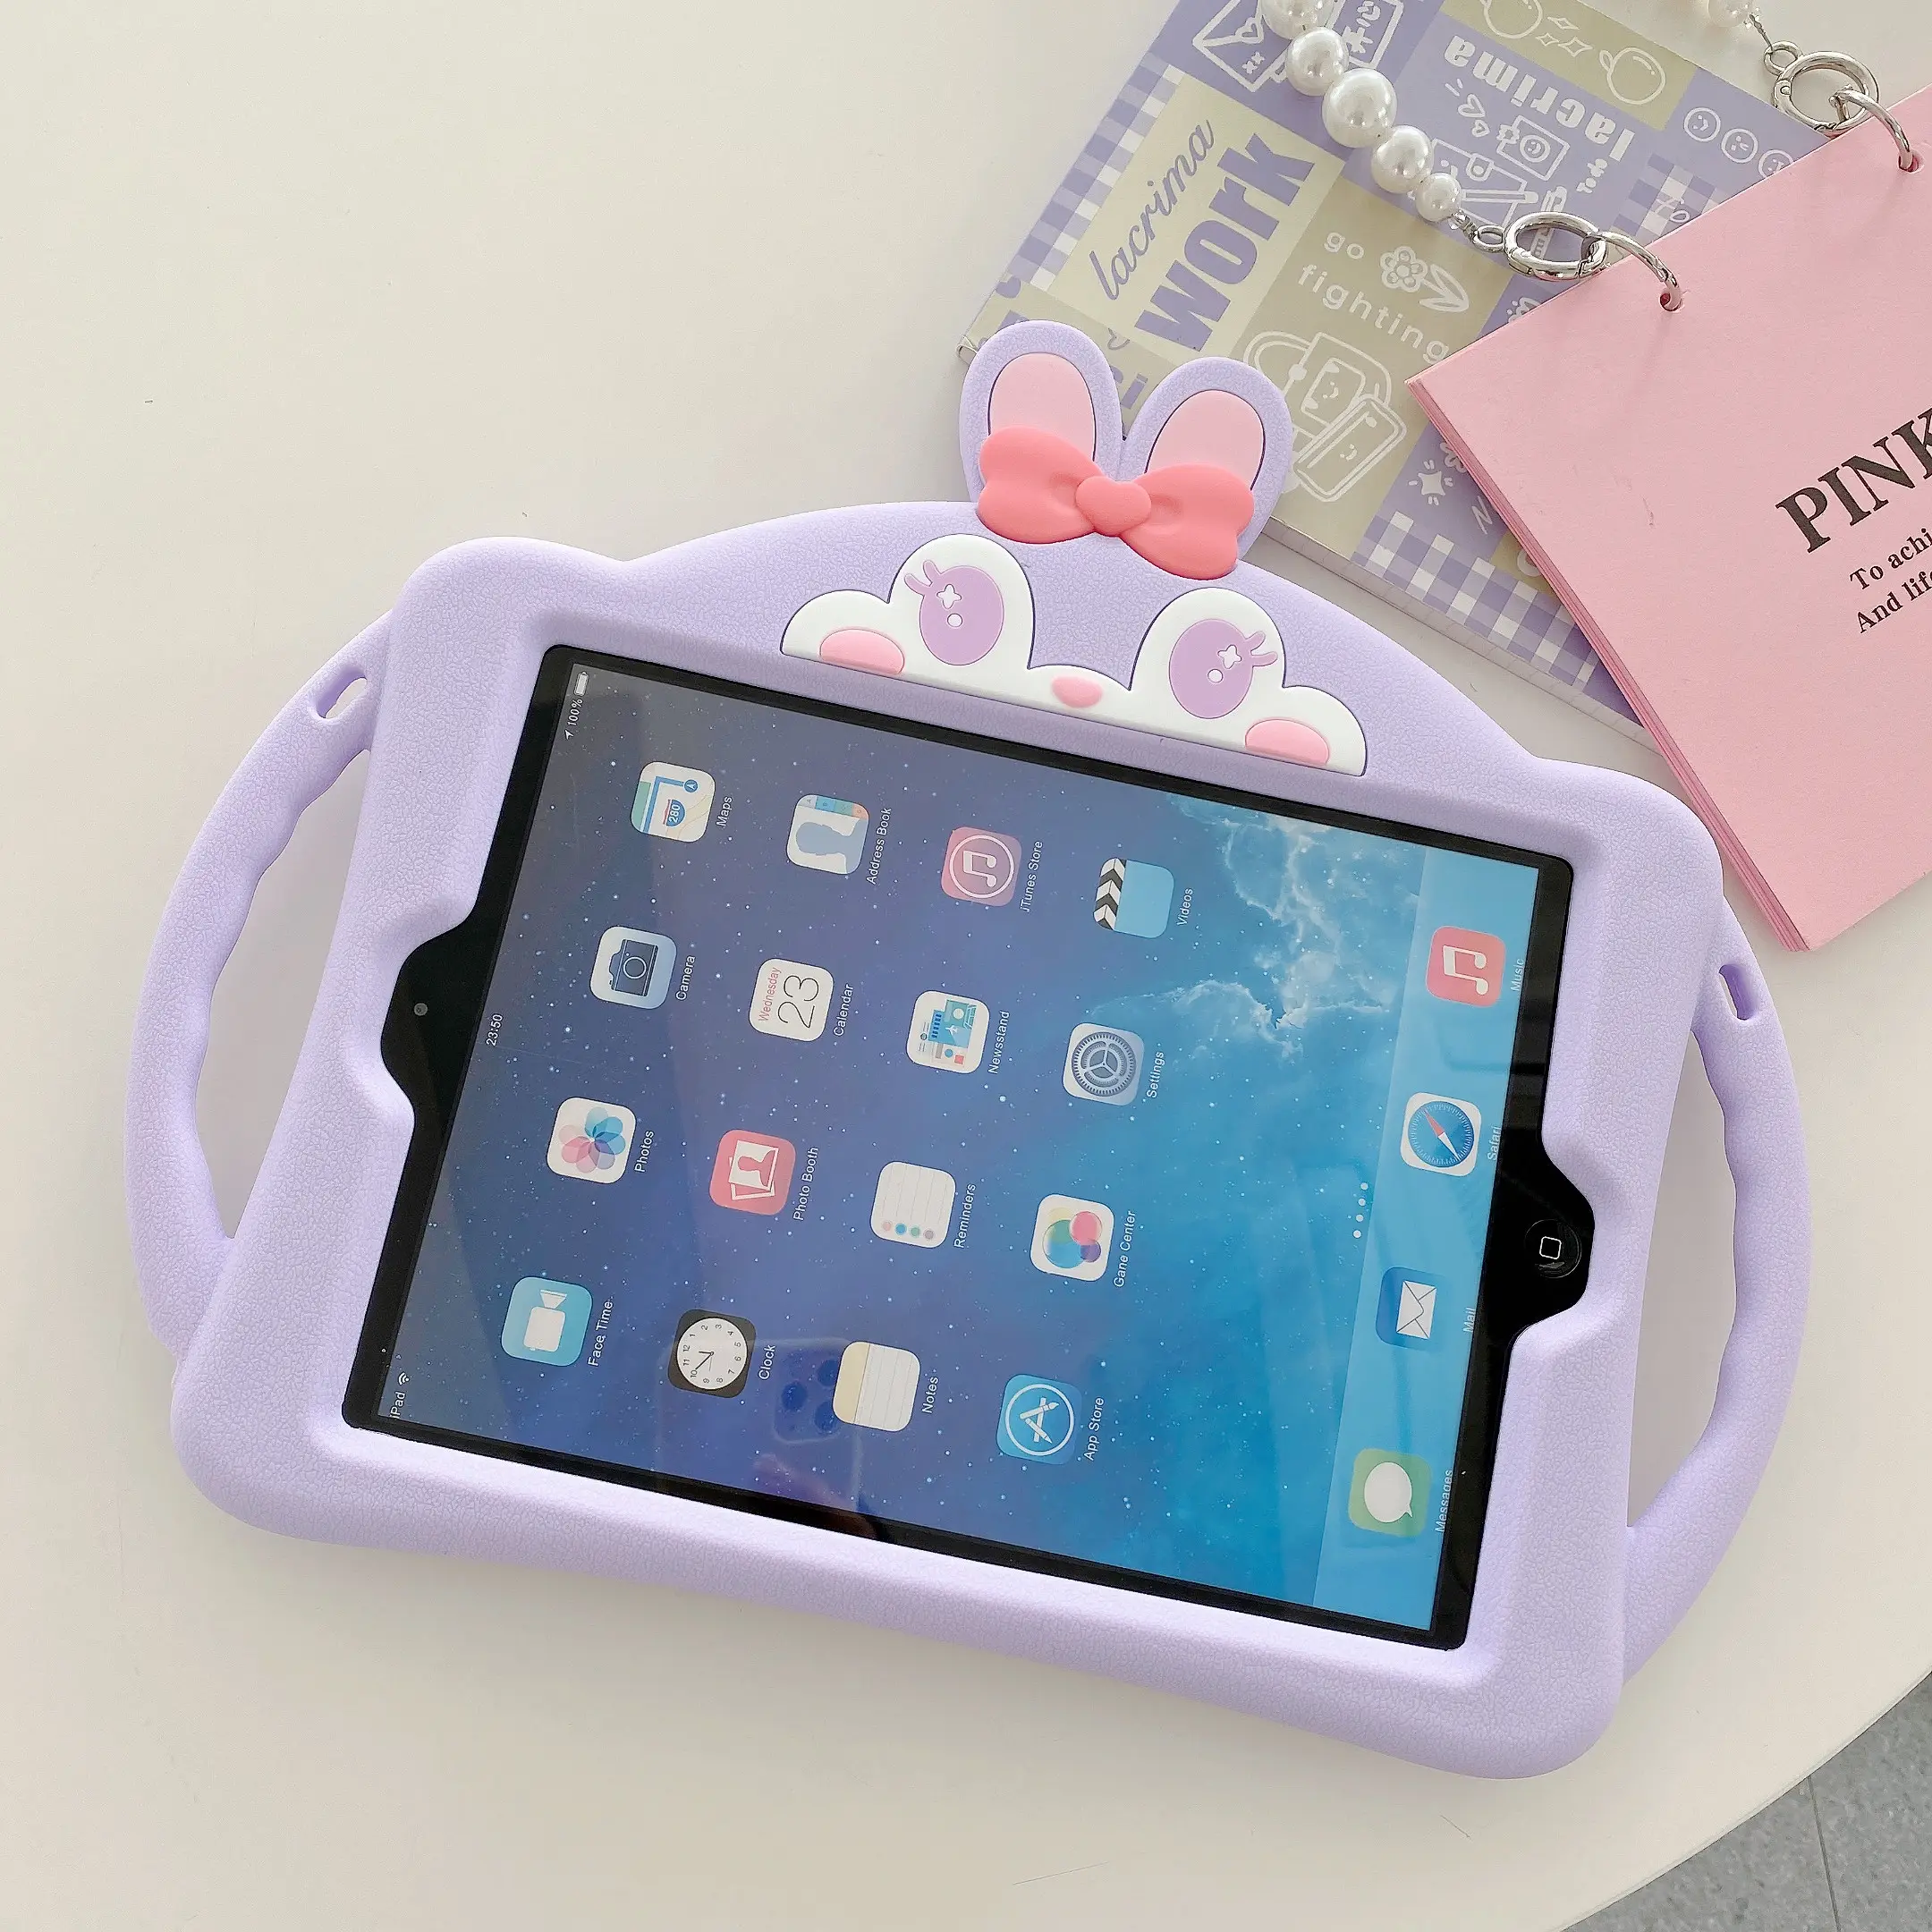 FBA Amazon Kids Soft Silicone Case for iPad Mini 6 5 4 3 2 1,Silicone Childproof for iPad Mini6 5 4 3 2 1, Built-in Handle Stand